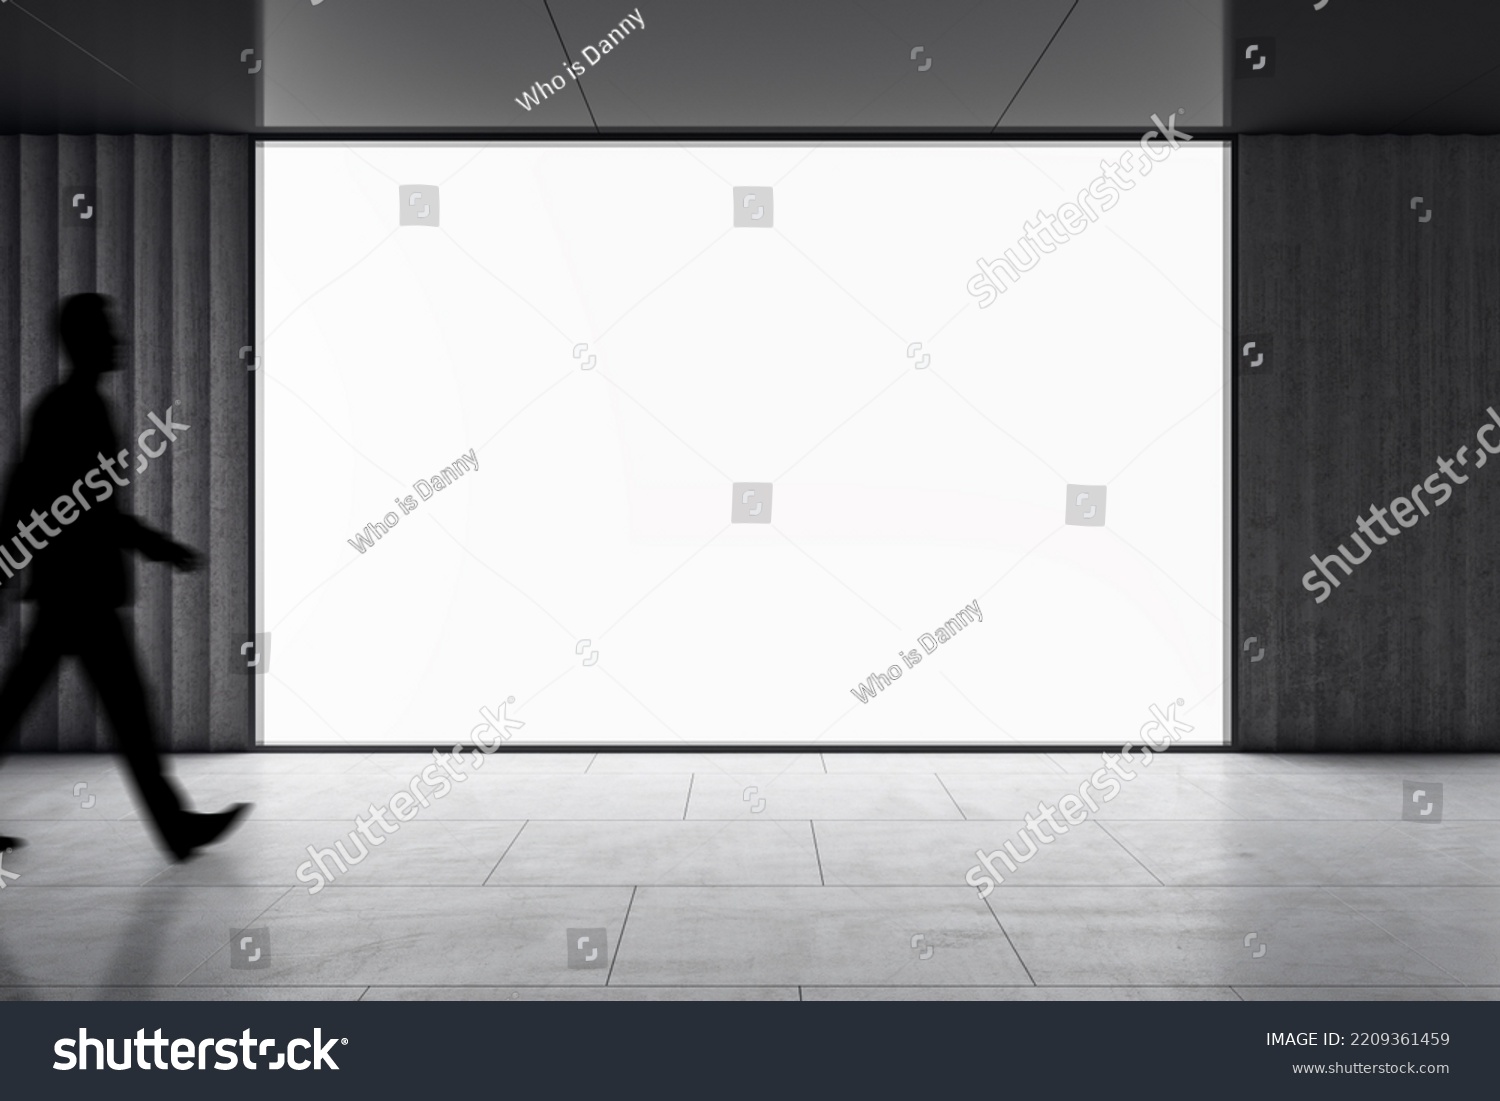 Dark man silhouette walking by big blank white screen with space for your logo or text in abstract empty hall area with dark ceiling and floor, mockup #2209361459